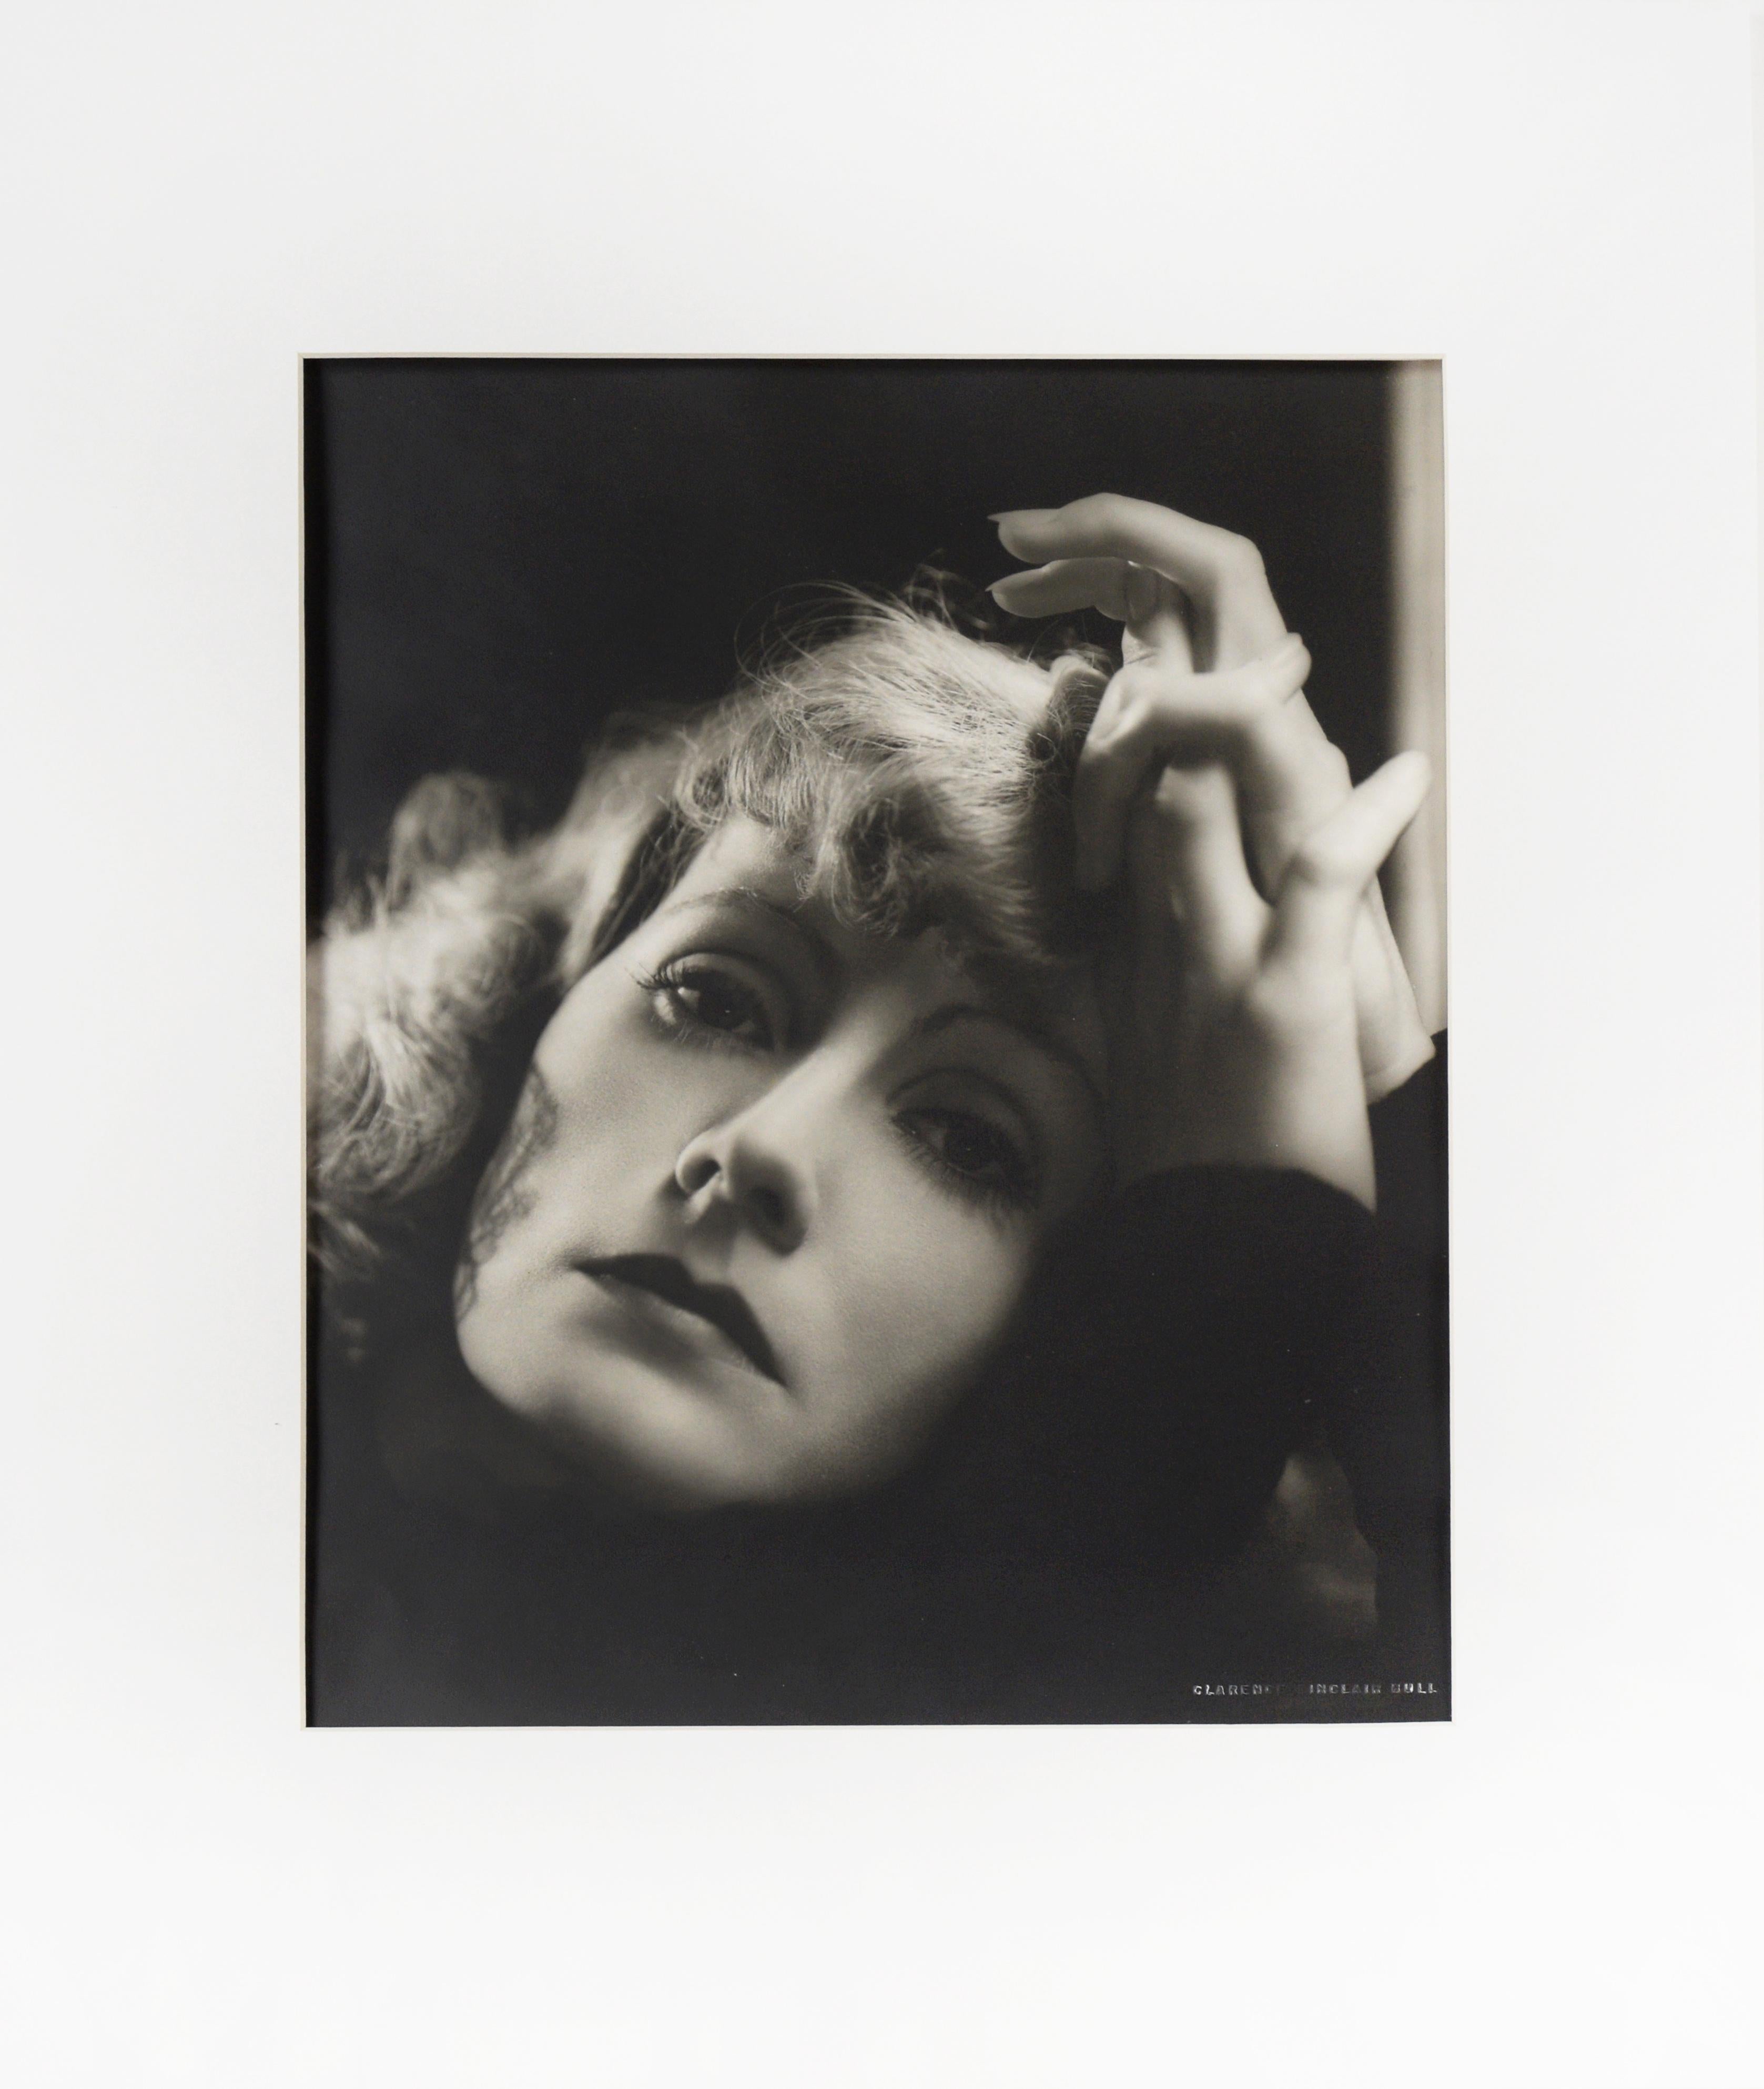 Greta Garbo "Her Rise And Fall #2" - 1931 Photograph by Clarence Sinclair Bull

 A black and white photograph by Clarence Sinclair Bull (American, 1896-1979), matte finish, double-weight paper, depicting a 1931 shot of Swedish/American actress Greta